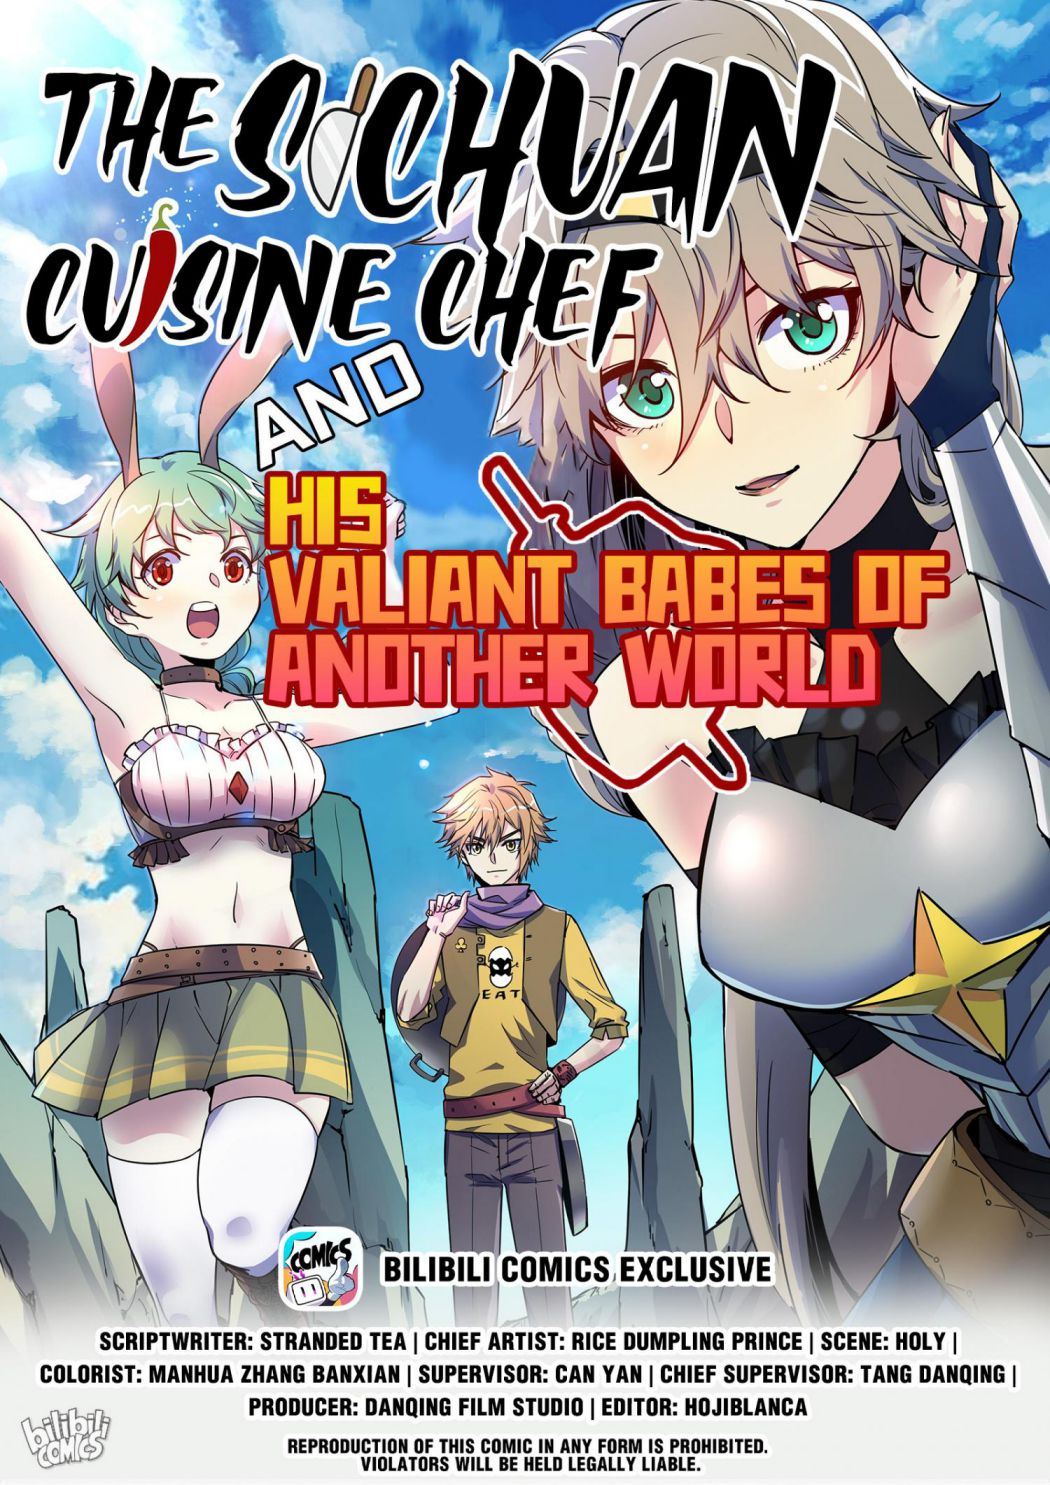 The Sichuan Cuisine Chef And His Valiant Babes Of Another World - Page 2